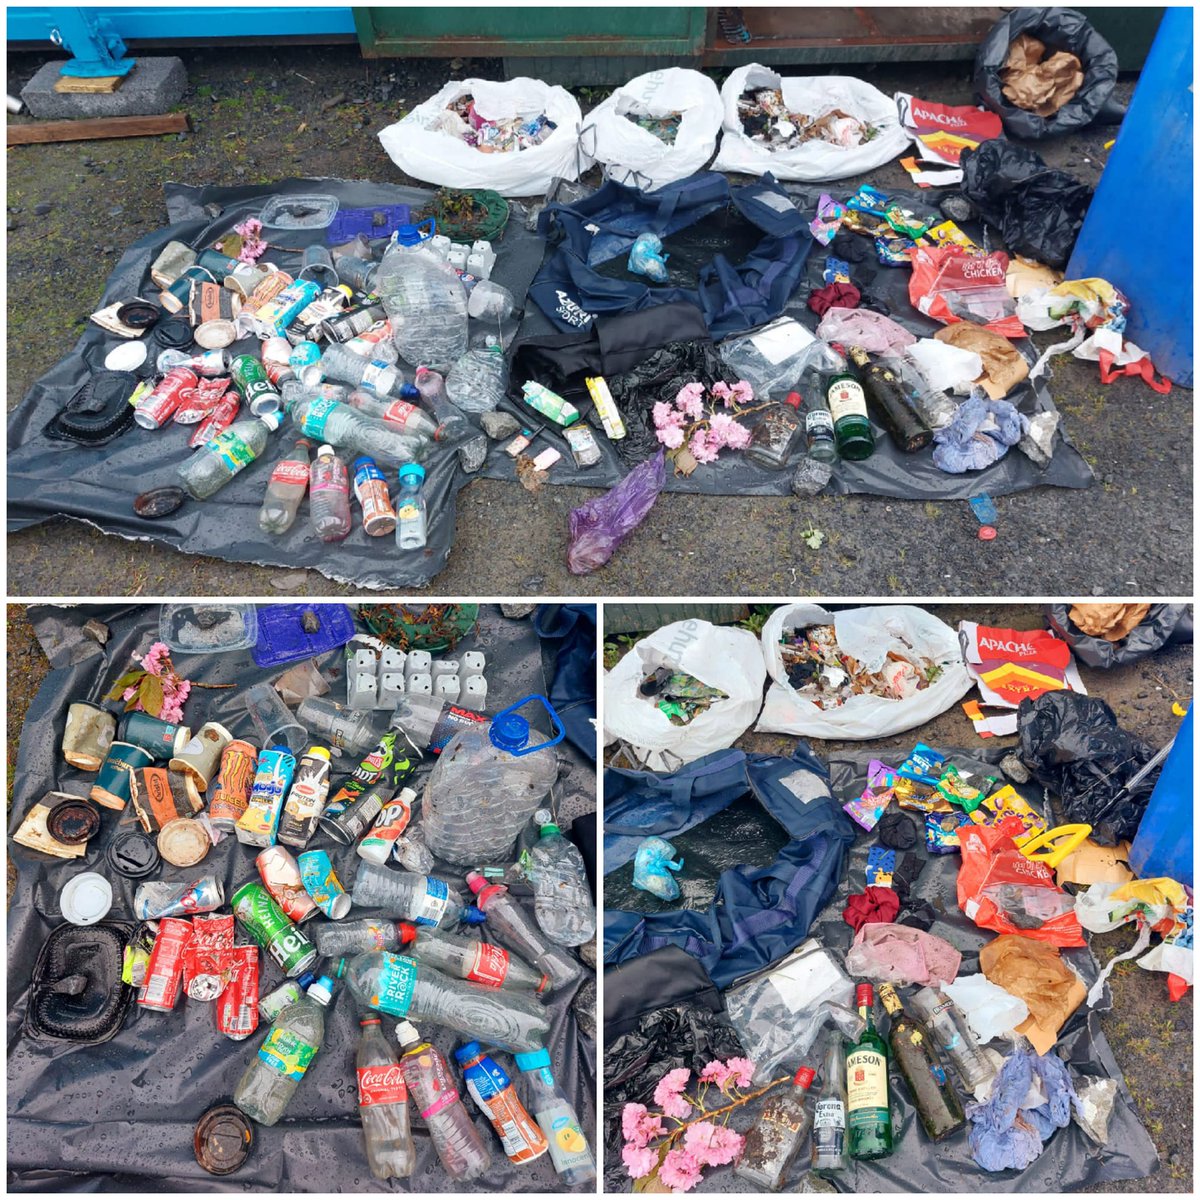 Huge display of litter collected by Oranmore tidy towns! Much of this could be prevented if people who littered it opted to do a #2MinuteStreetClean instead, but at least we have brilliant volunteers at #NationalSpringClean to ensure its cleared!

#SDGsIrl #SpringClean24 #Galway